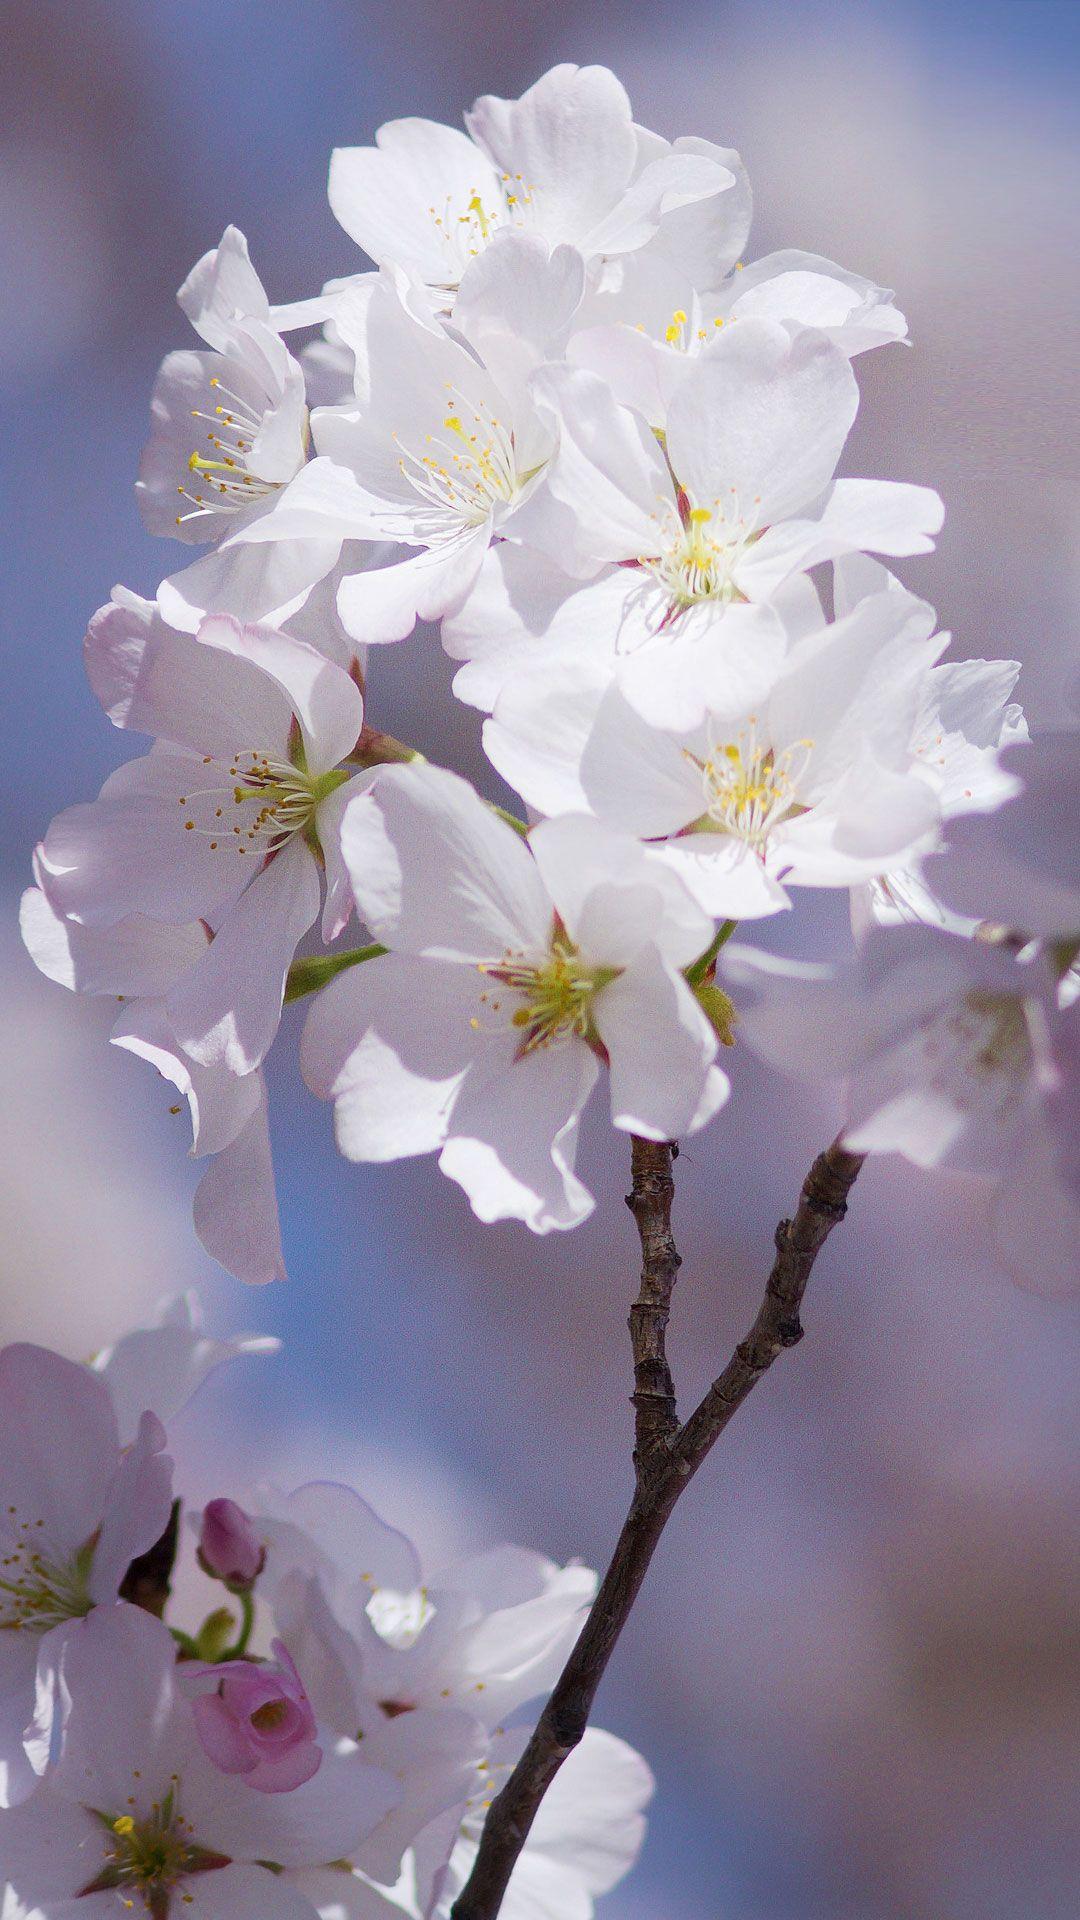 Free Android Cherry Blossom Wallpaper iPhone. Cherry Blossoms